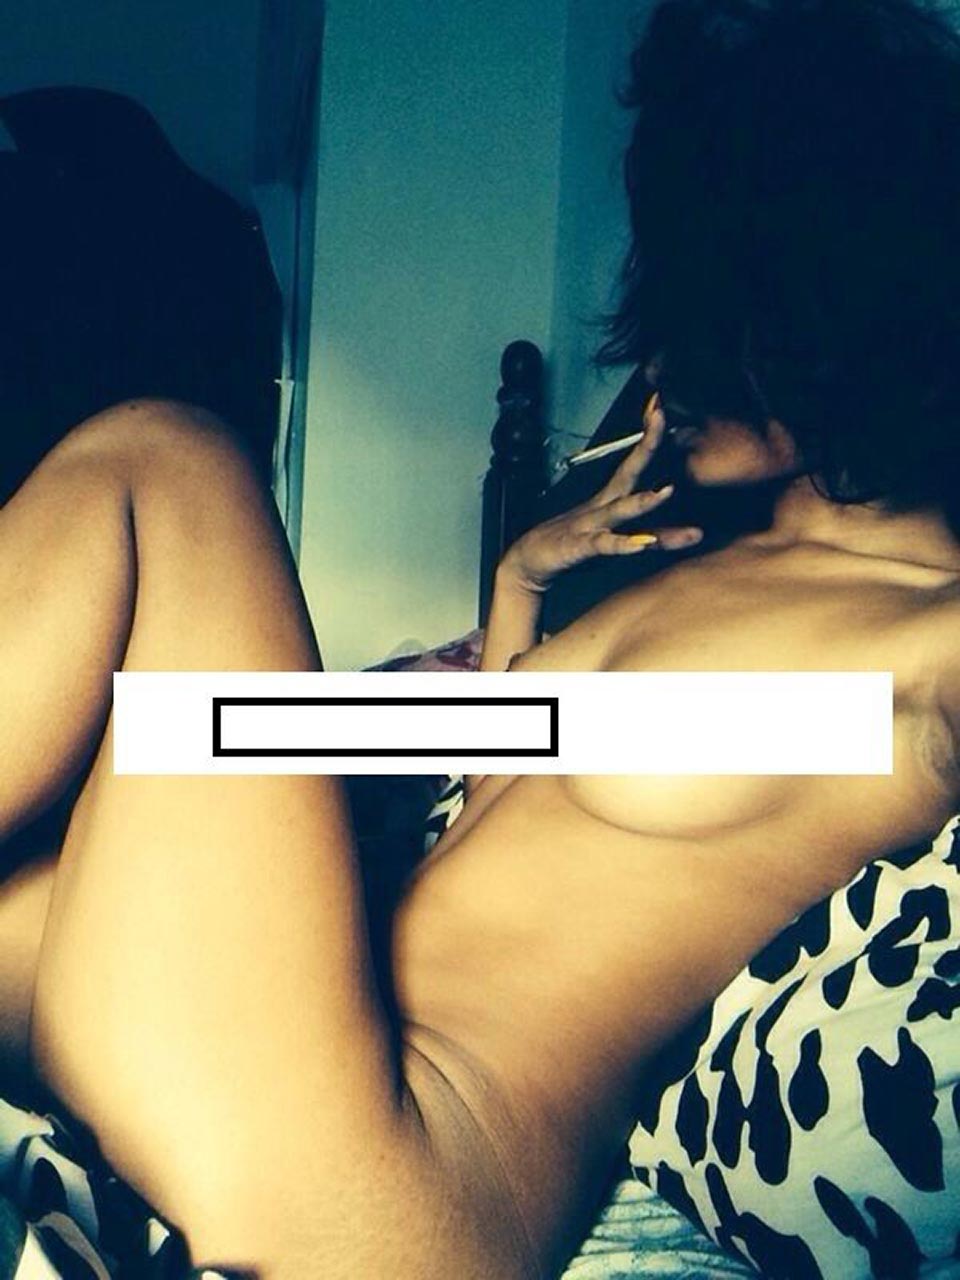 Hottie Leigh-Anne Pinnock nude pics are here, leaked straight from her Snap...